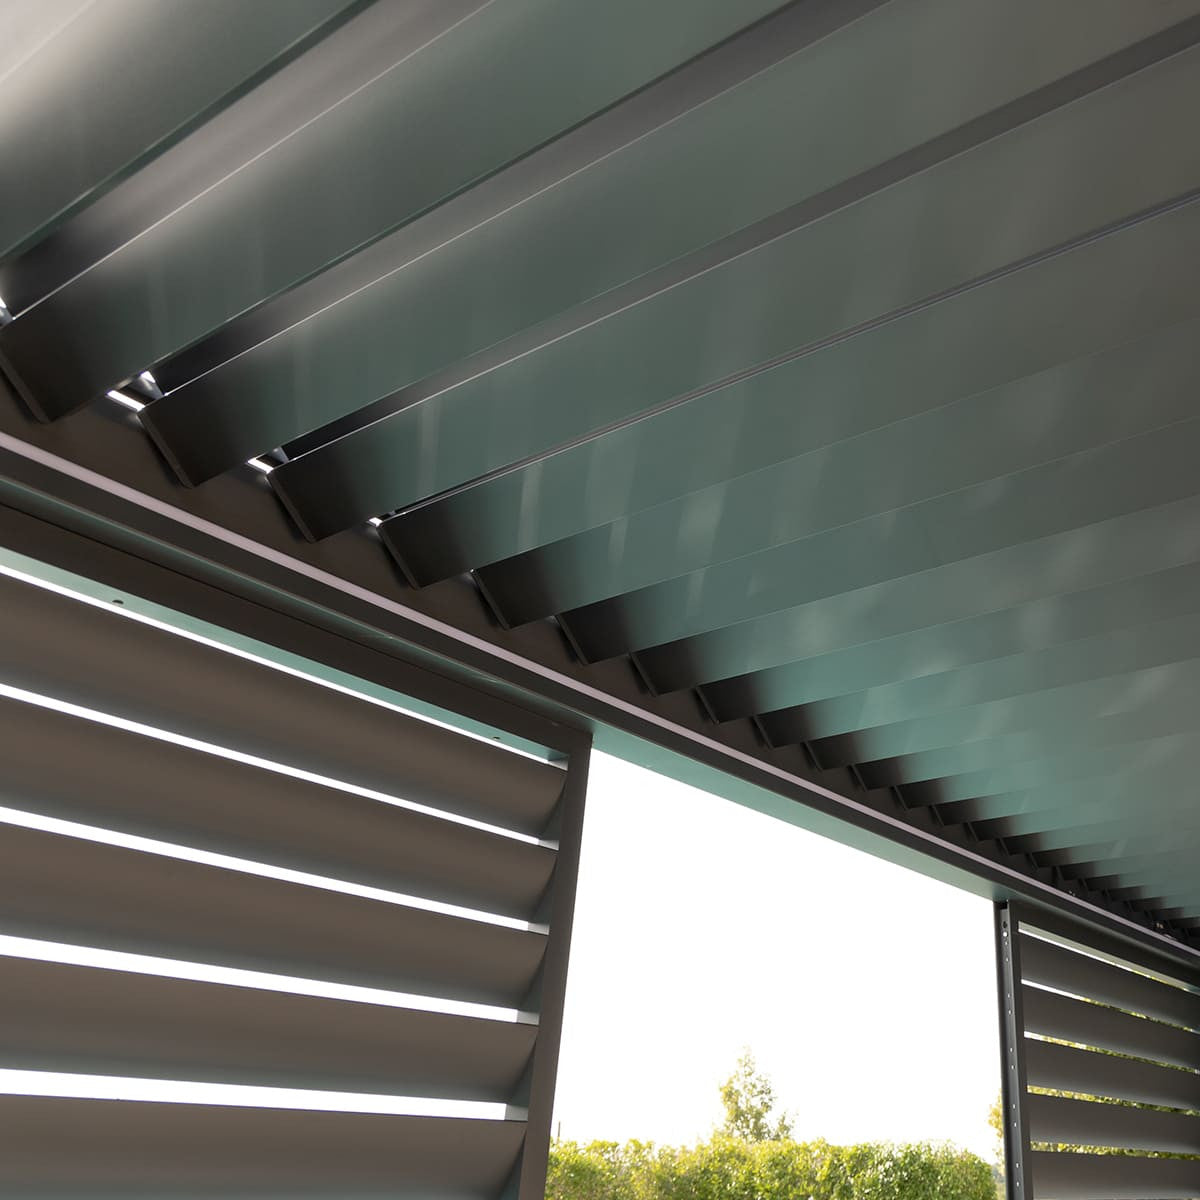 Maze Eden Pergola Aluminium Square 40x40 / Louvre Wall 4m / 3x Blinds With Louvre's Open-Better Bed Company